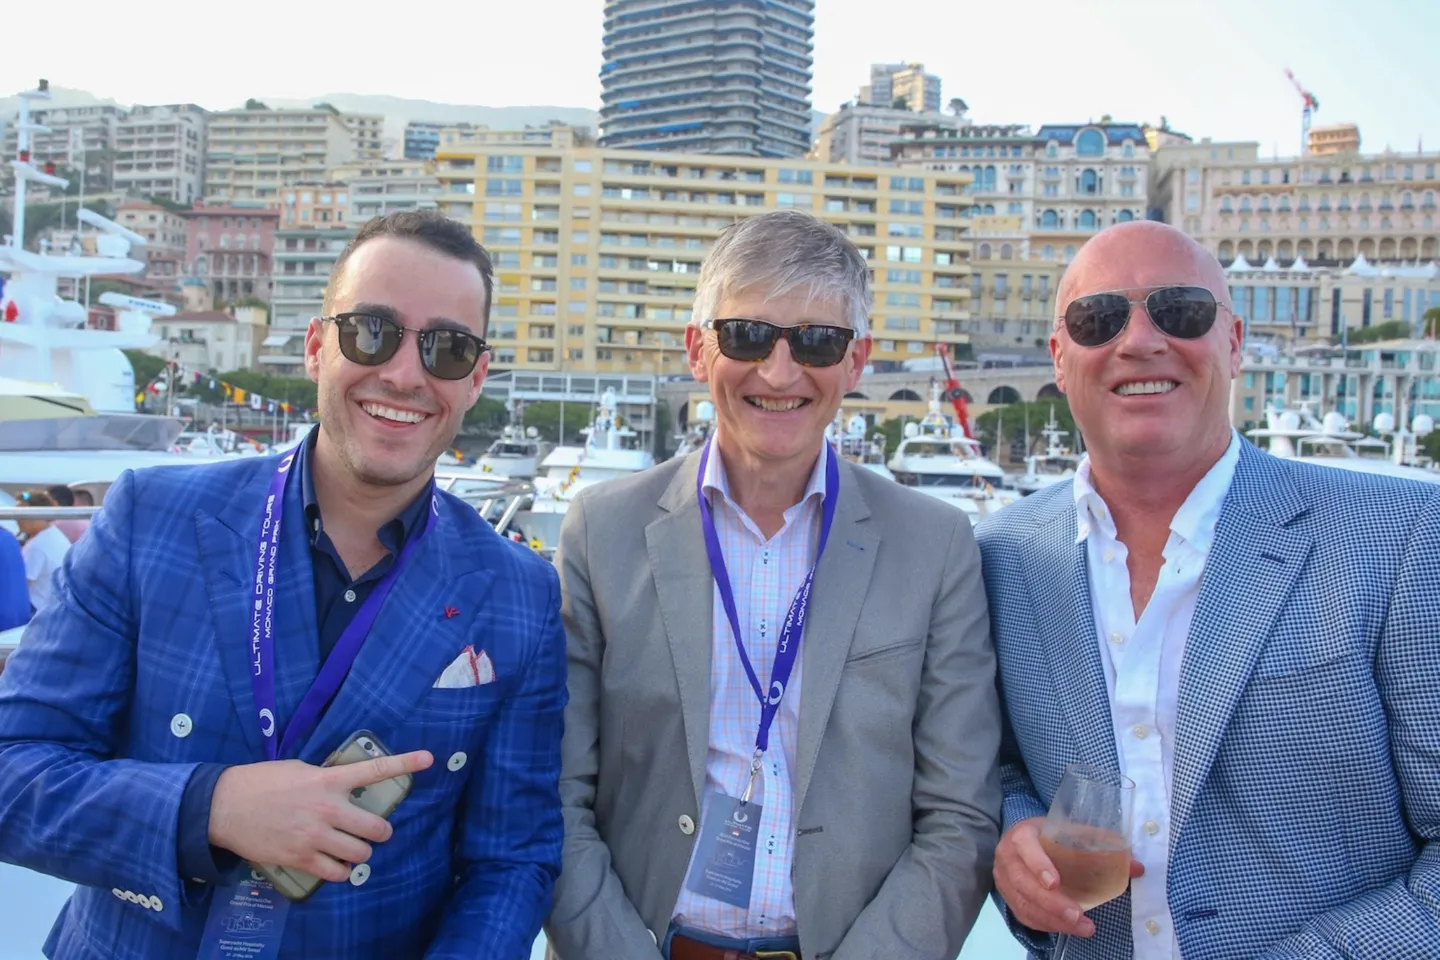 three men wearing suit jackets and sunglasses at the Monaco Grand Prix